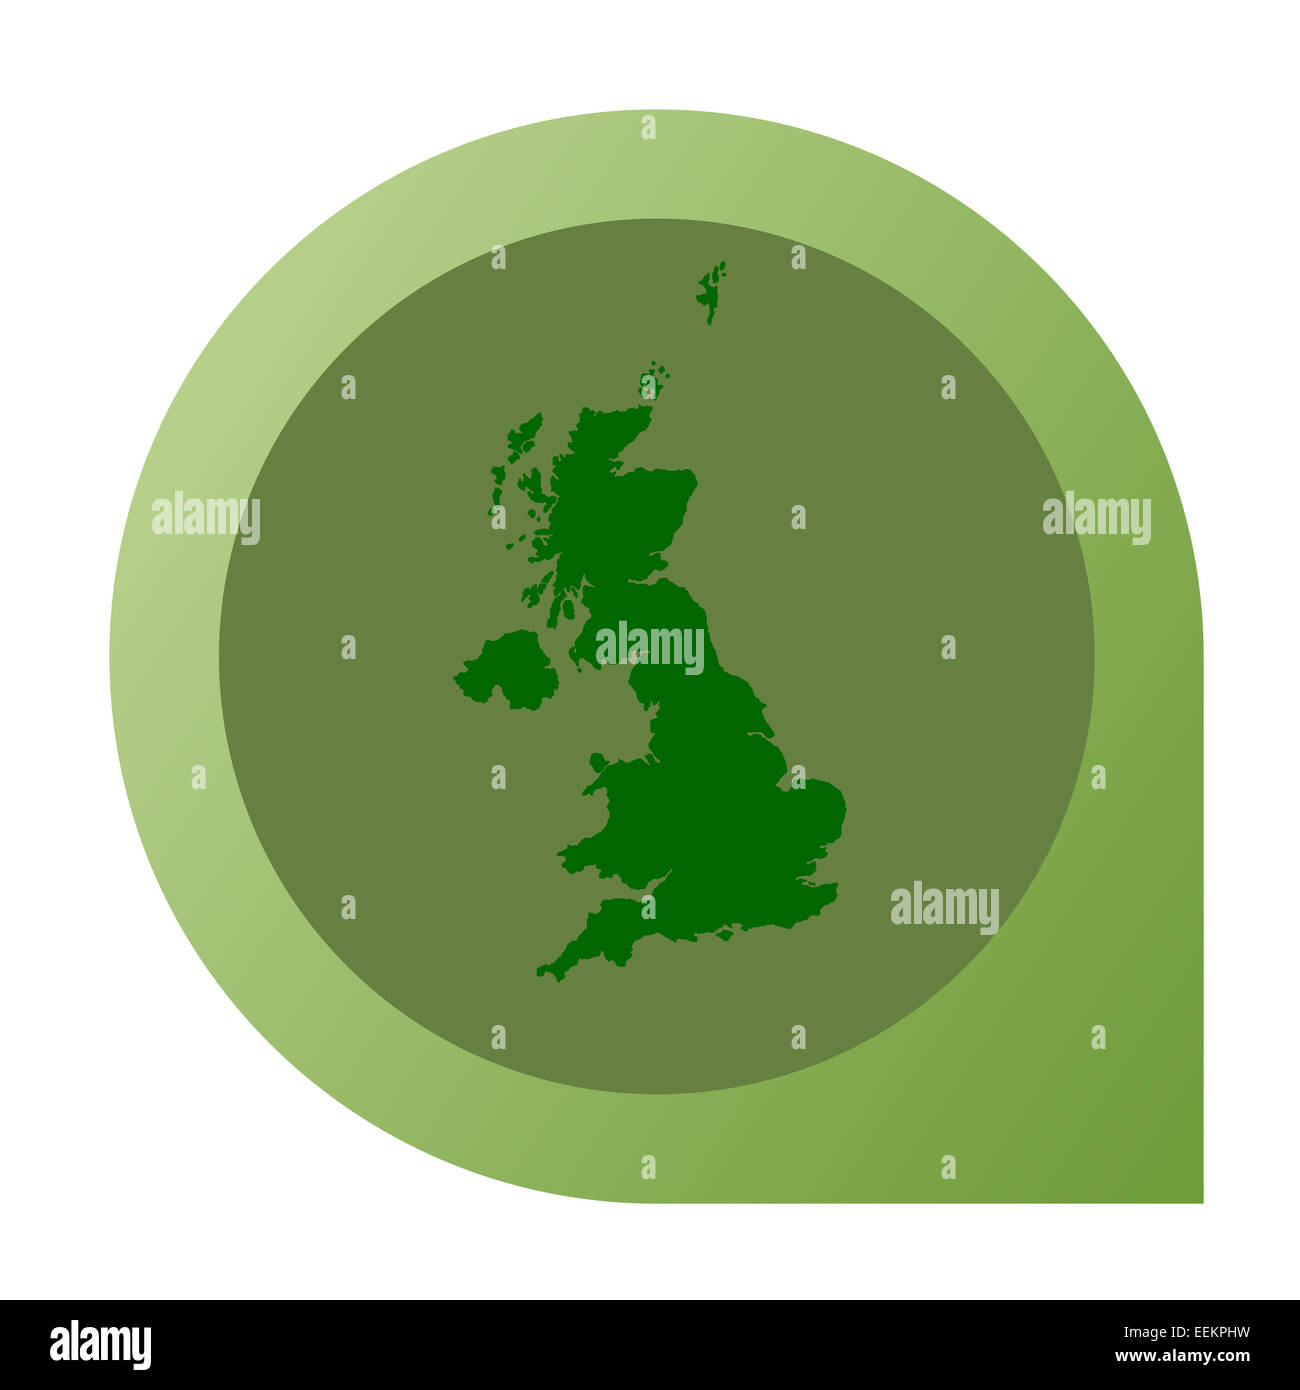 Isolated United Kingdom map marker pin in flat web design style. Stock Photo